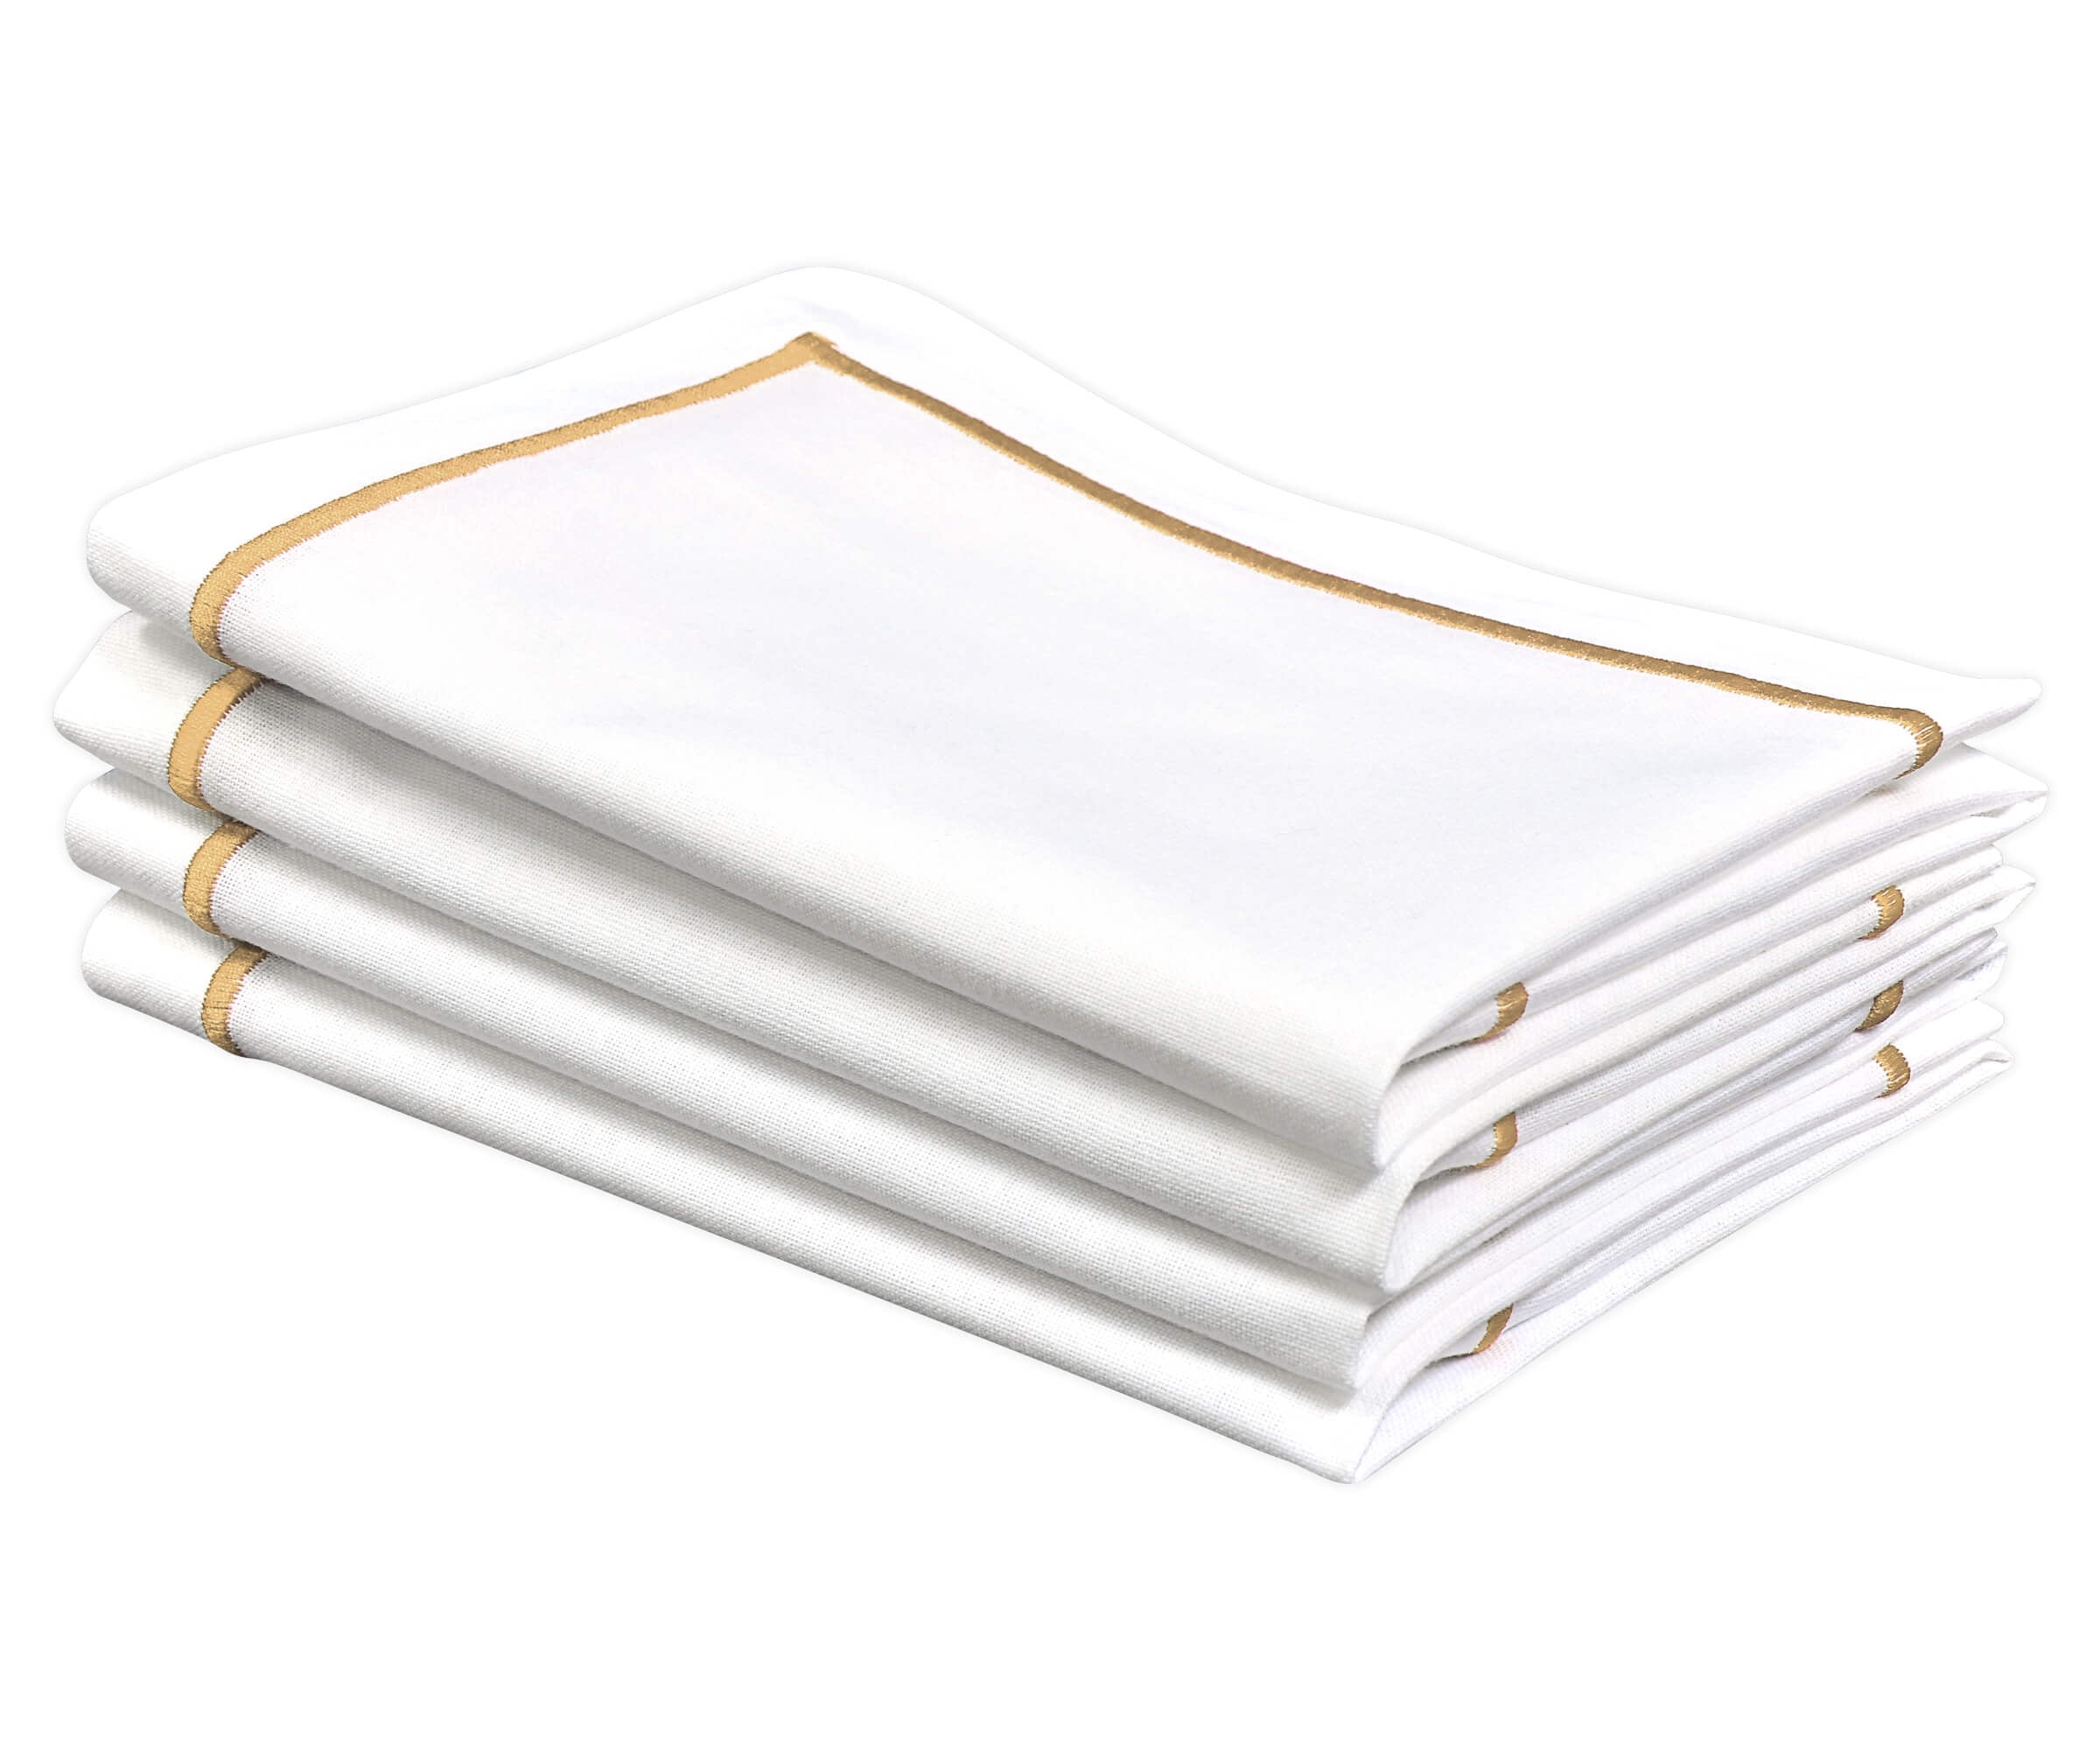 All Cotton and Linen Cloth Napkins, Dinner Napkins, White Napkins with Gold  Trim, Cotton Dinner Napkins, Linen Napkins, Home Decor, 18x18 Pack of 4